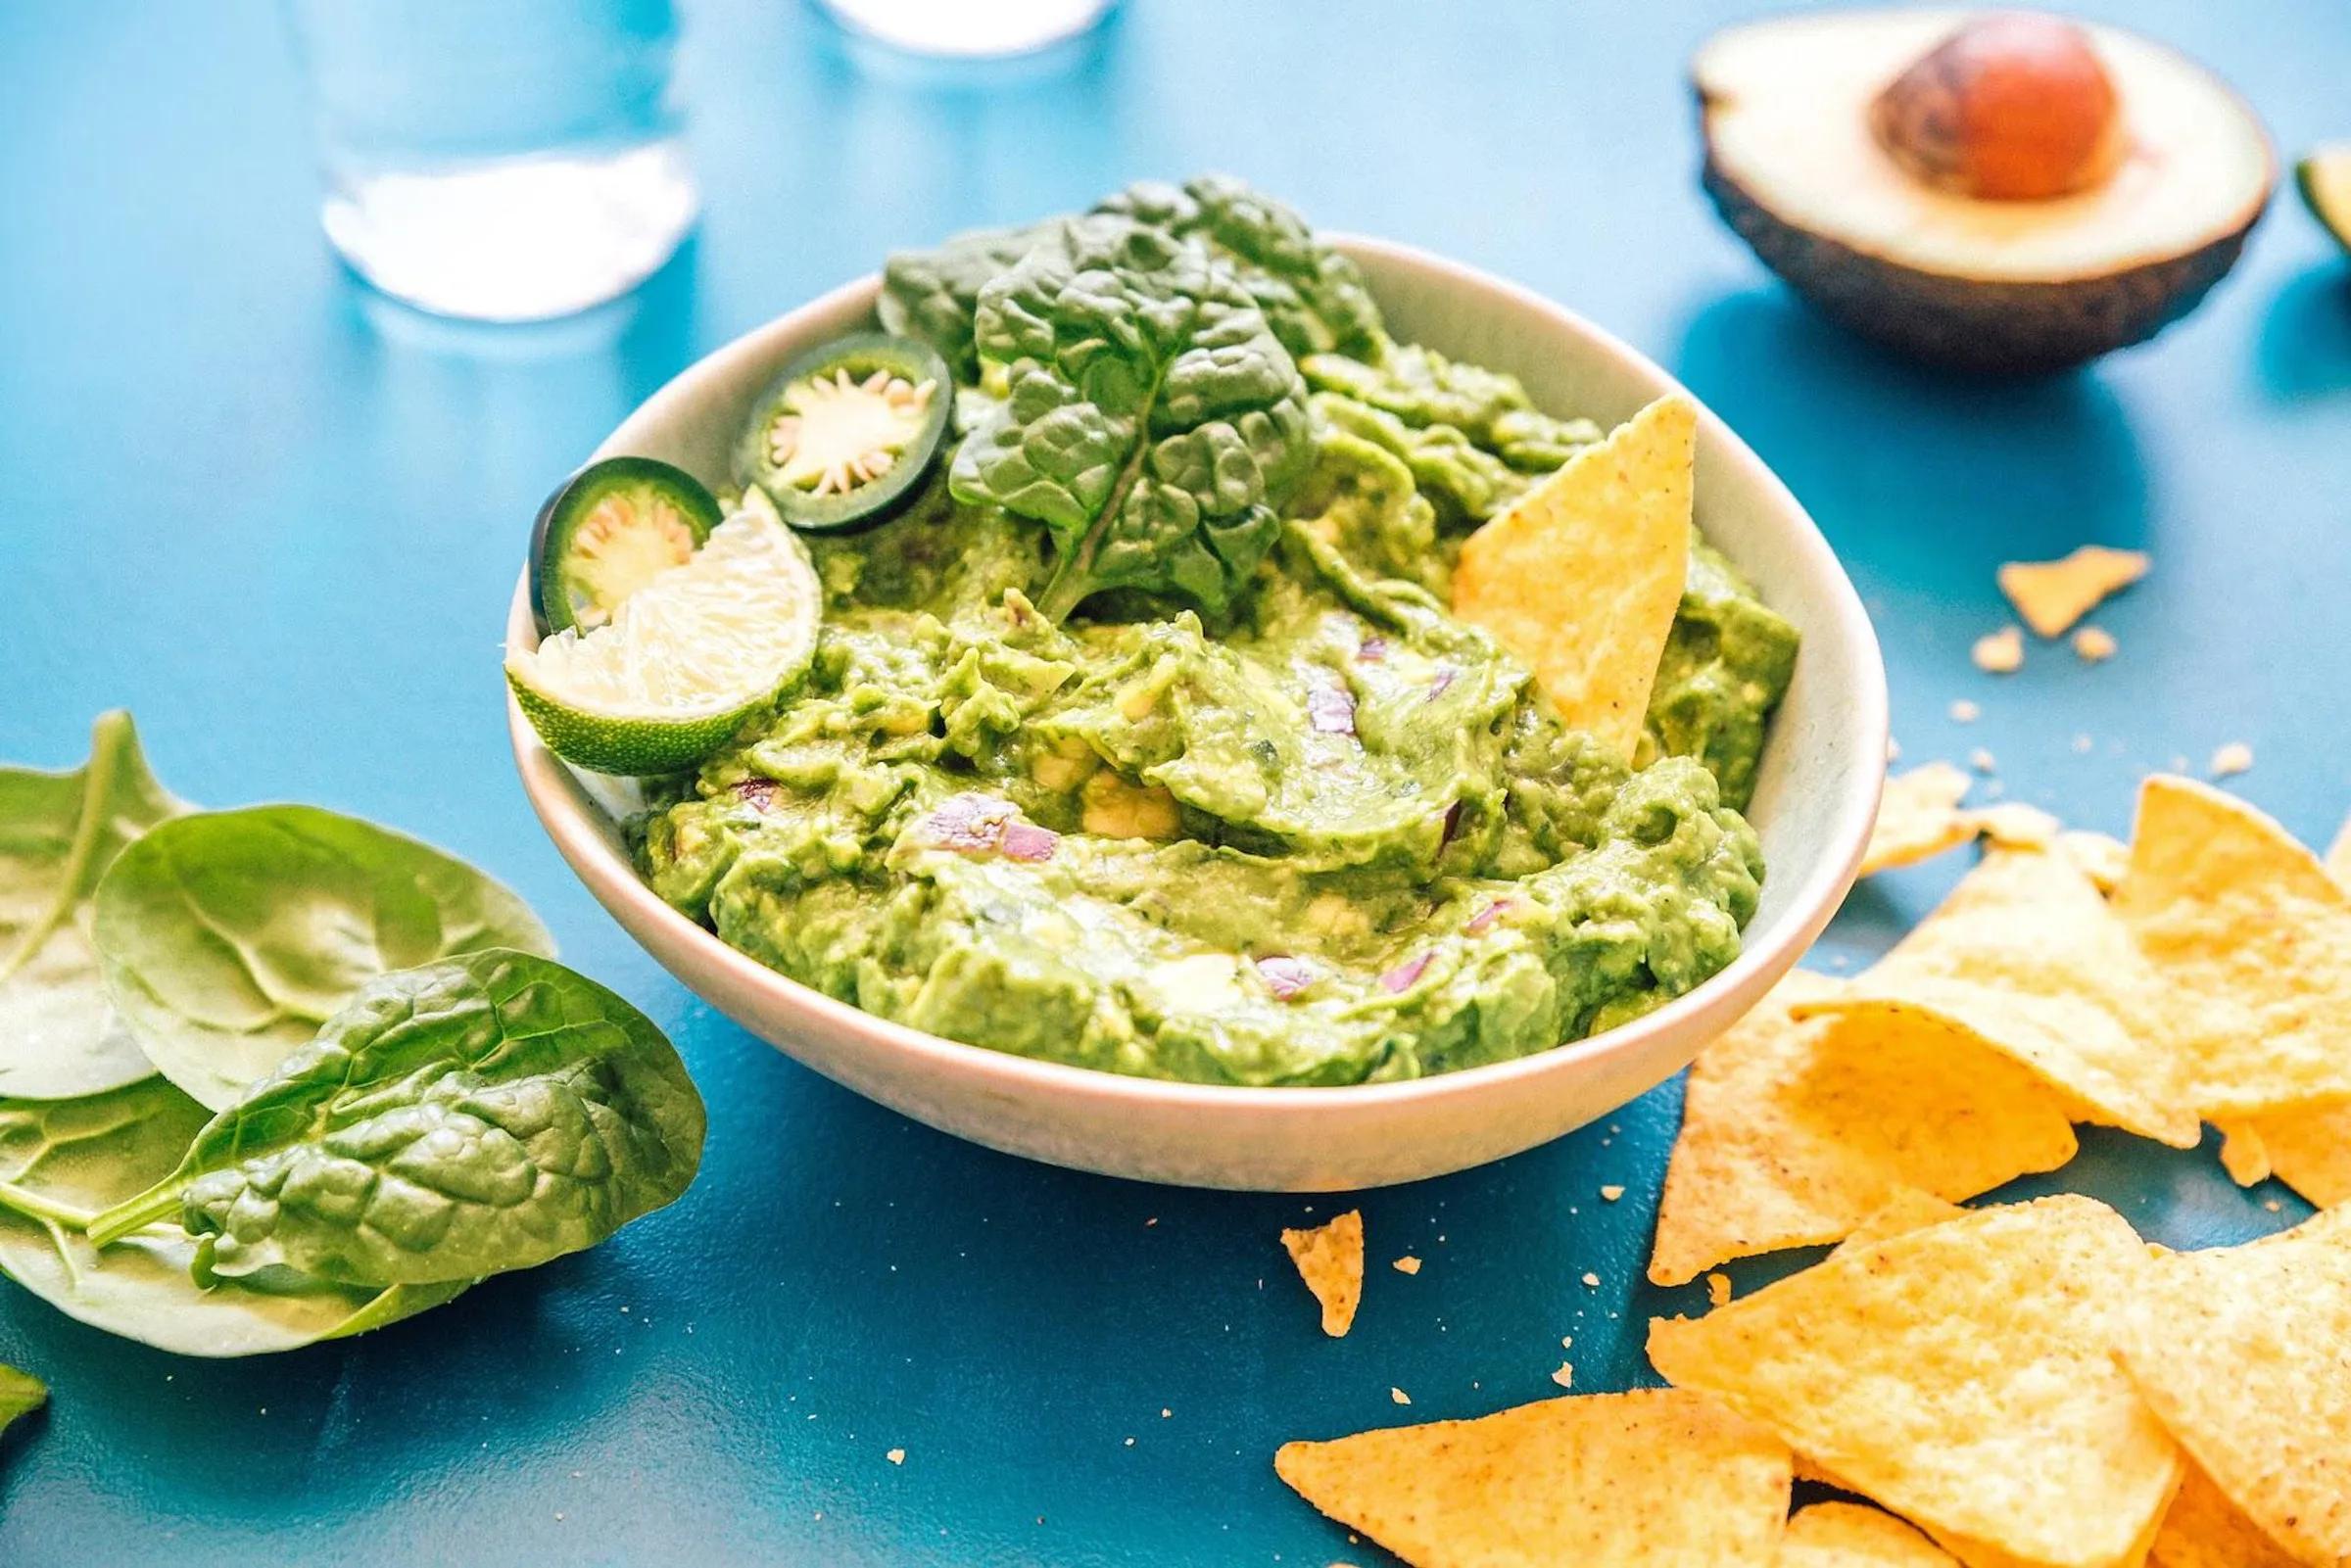 This guacamole is a quick mix of spinach, avocado, red onion, garlic, and jalapeño for a true power lunch. (via <strong><a href="https://www.brit.co/guacamole-recipe/">Brit + Co.</a></strong>)